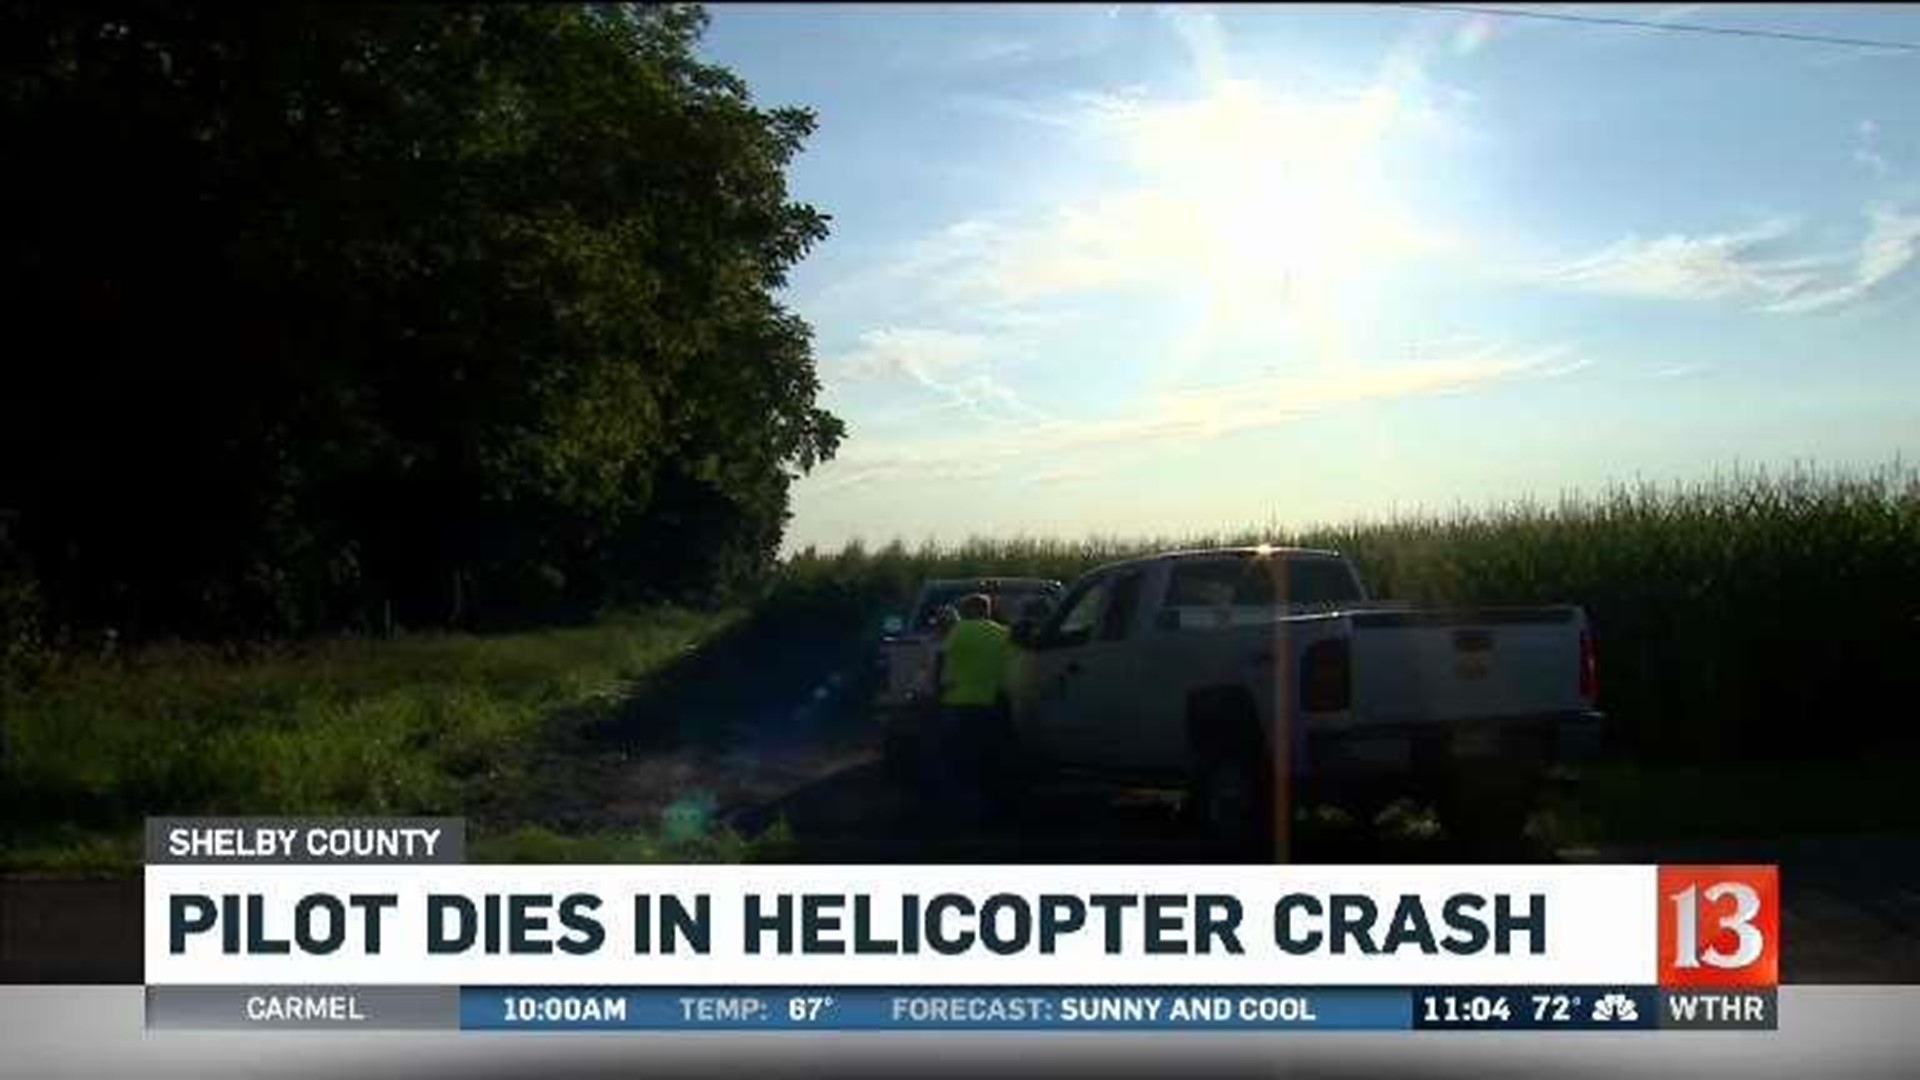 One dead in Shelby Co. helicopter crast